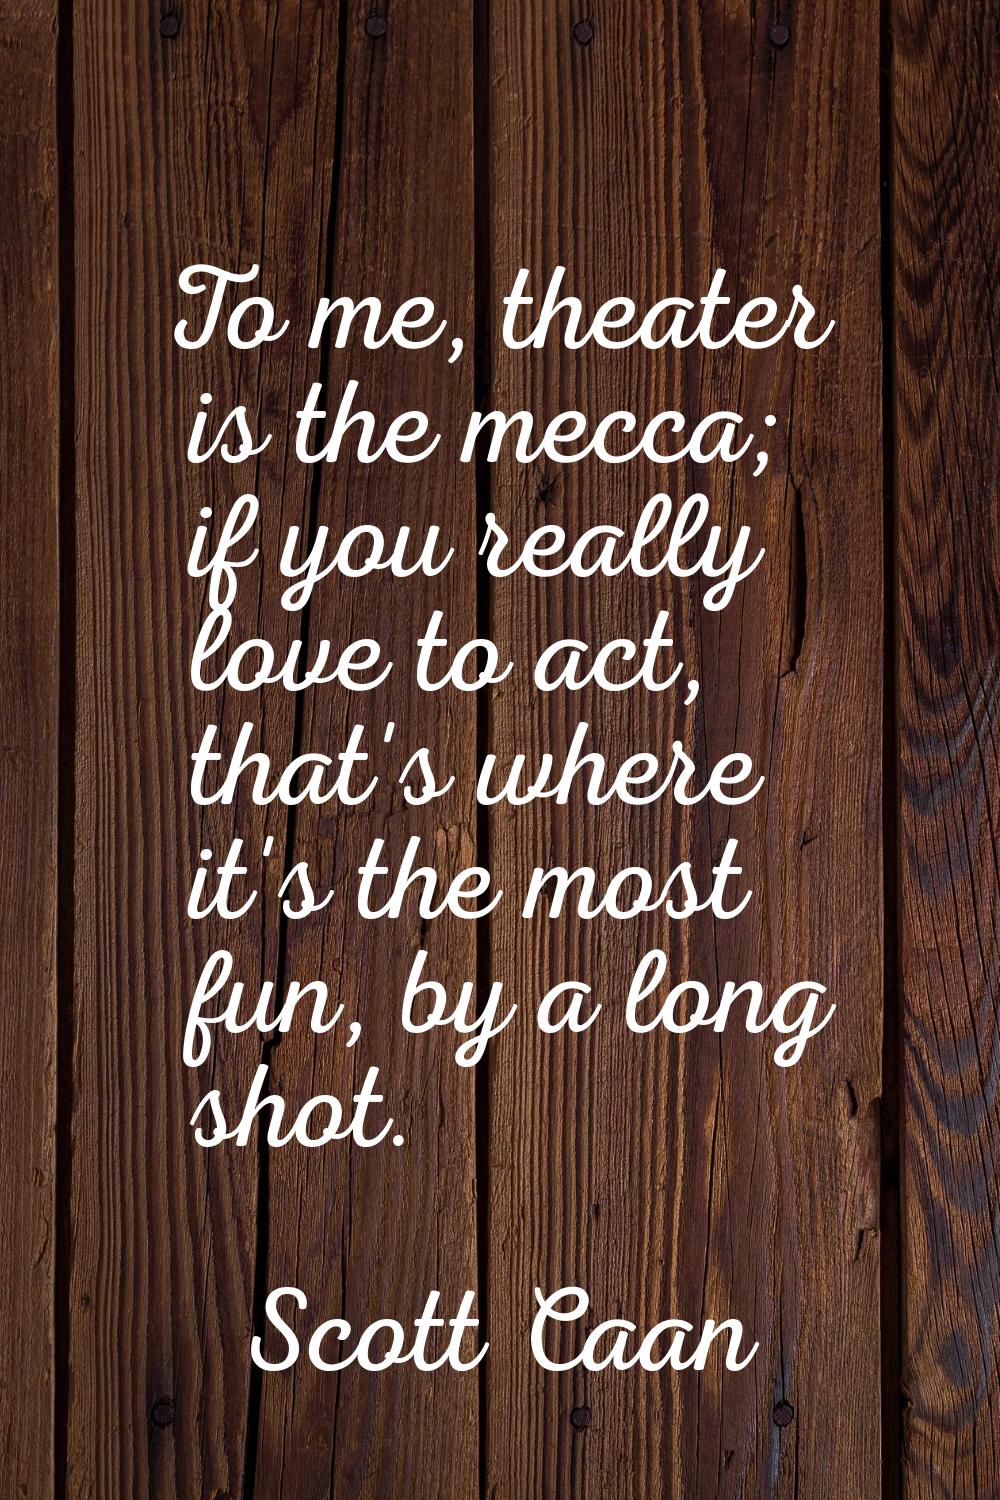 To me, theater is the mecca; if you really love to act, that's where it's the most fun, by a long s